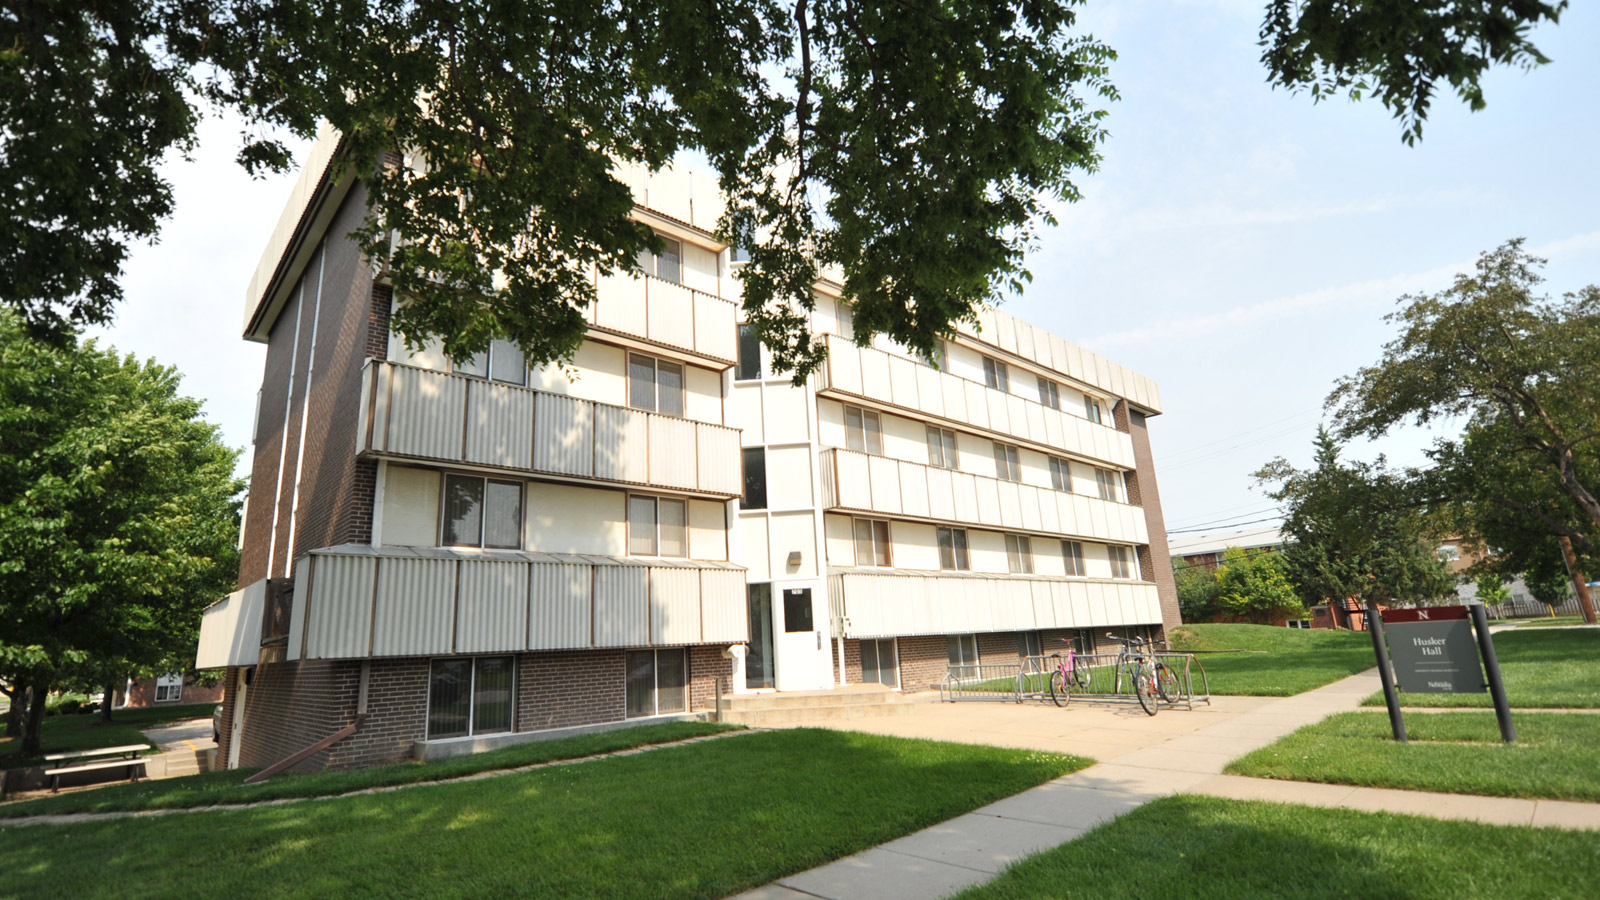 Husker Hall will serve as the home to UNL’s Collegiate Recovery Community (CRC).